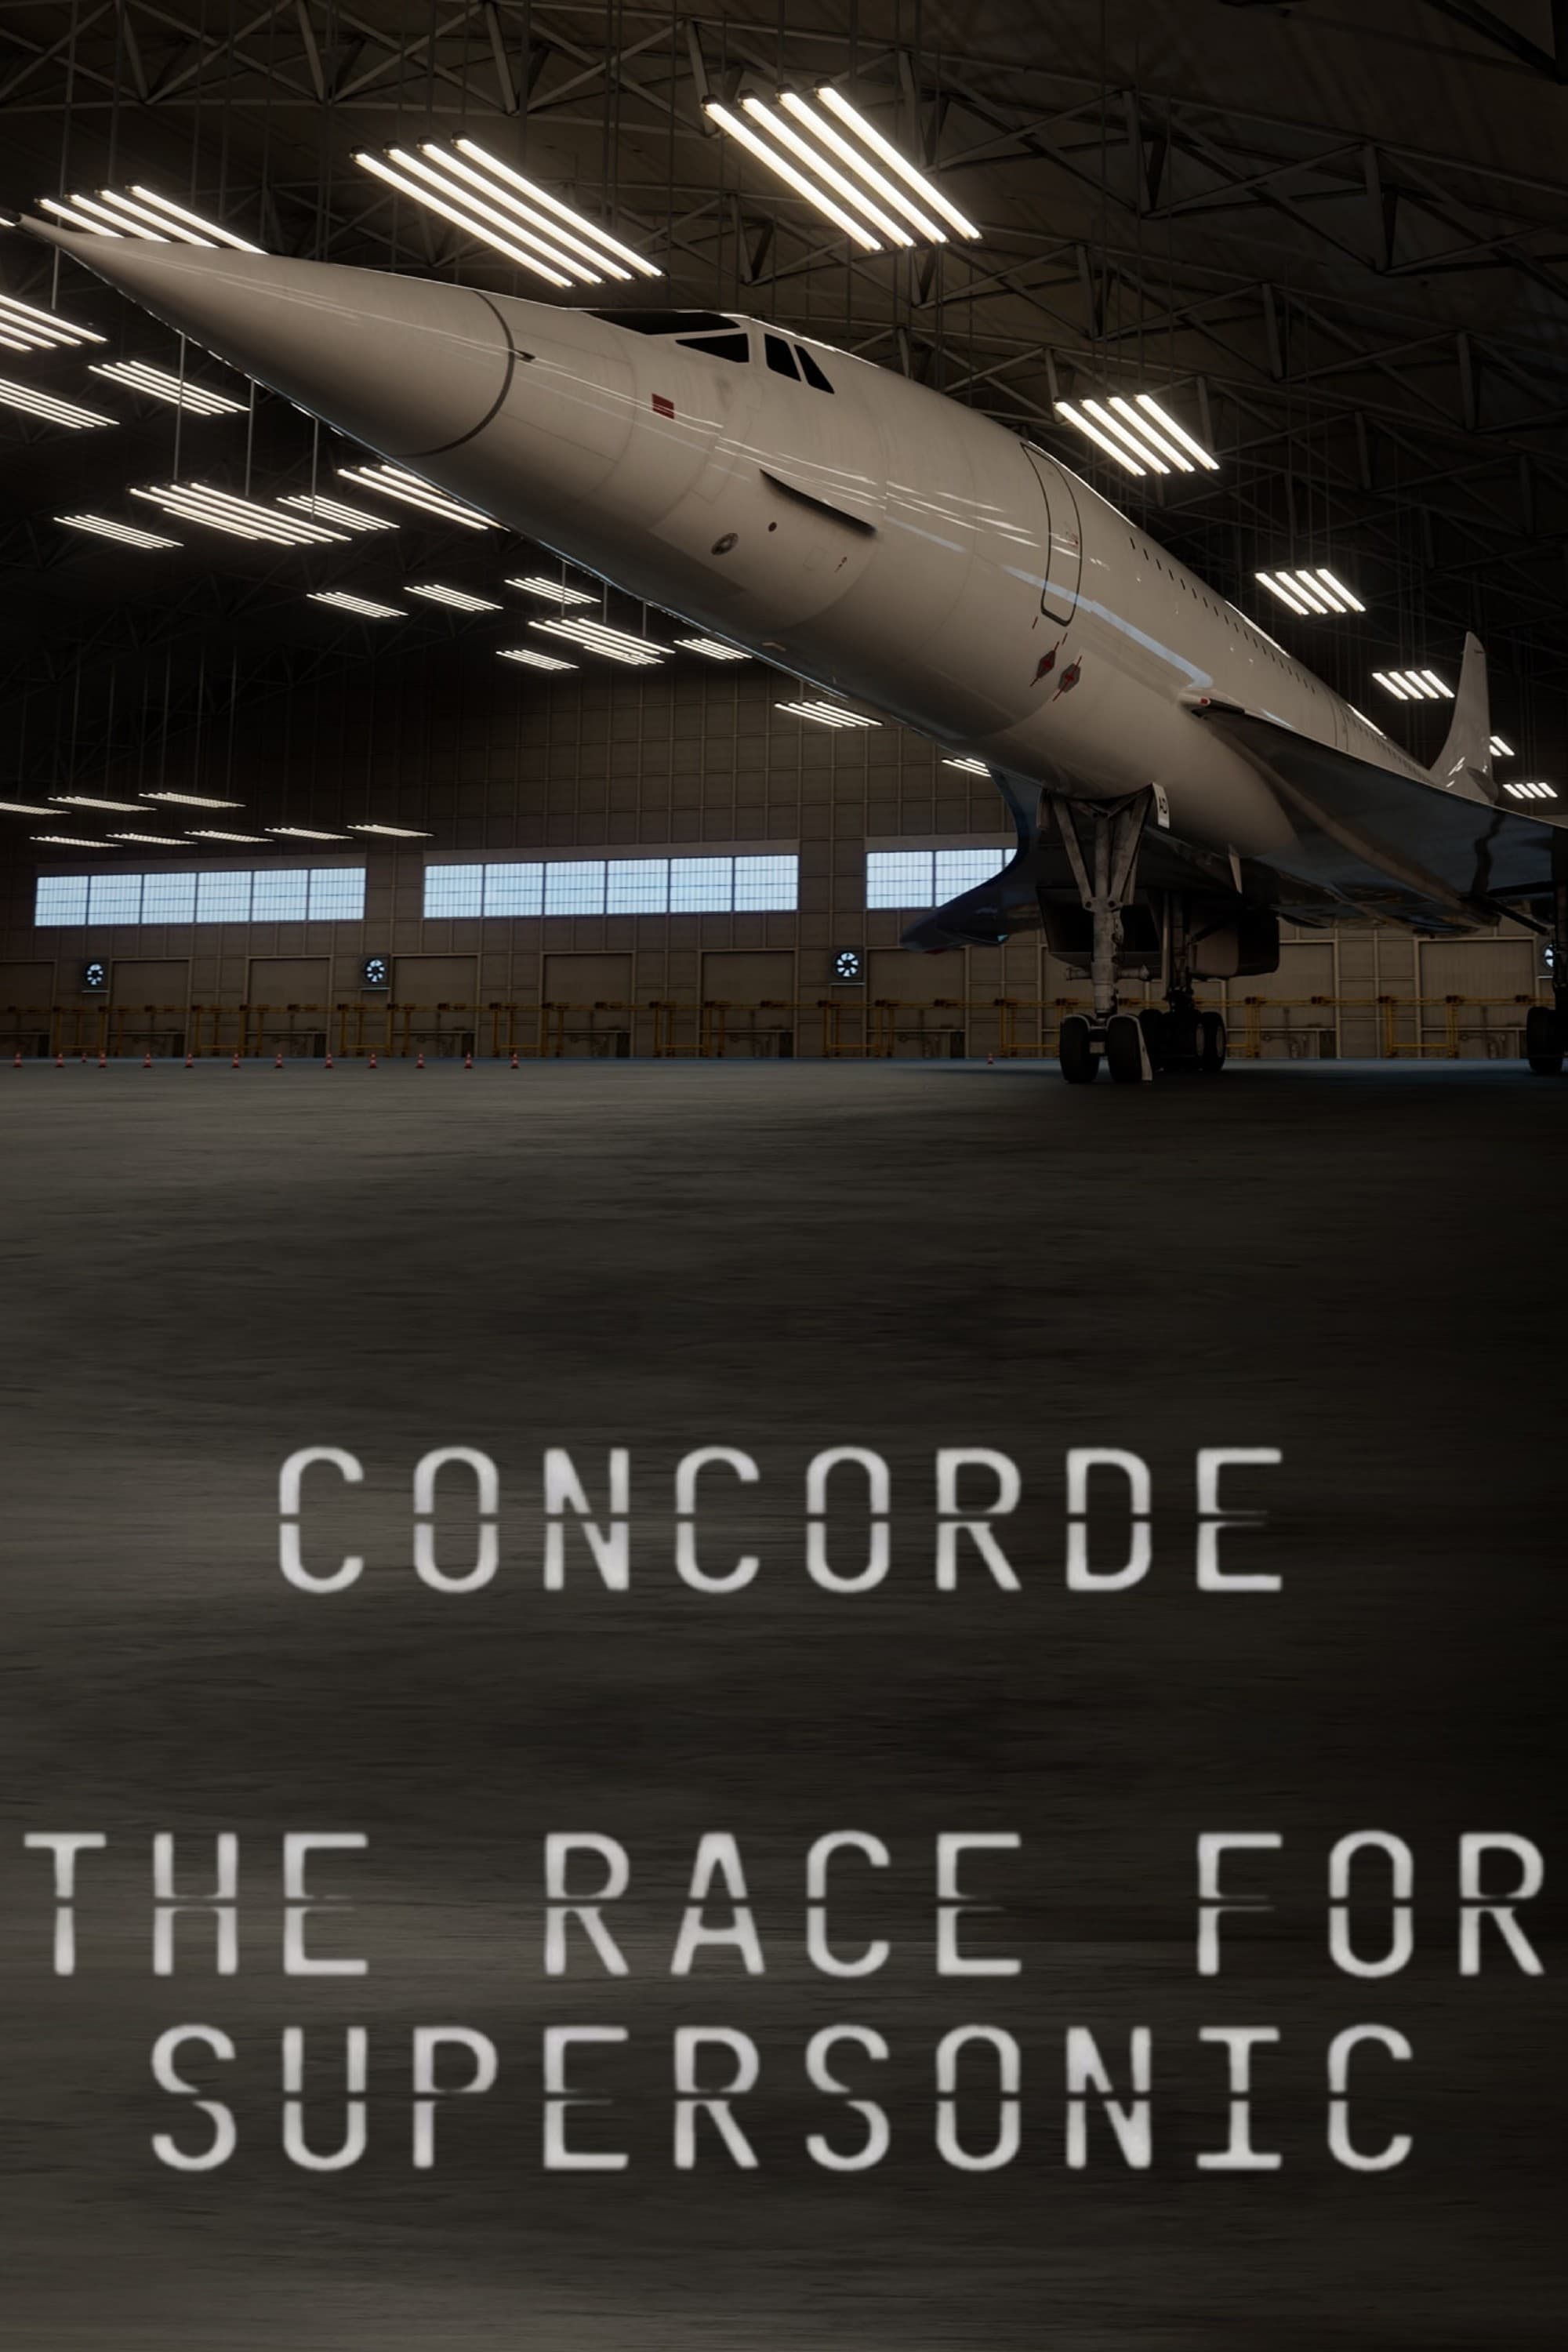 Concorde: The Race for Supersonic